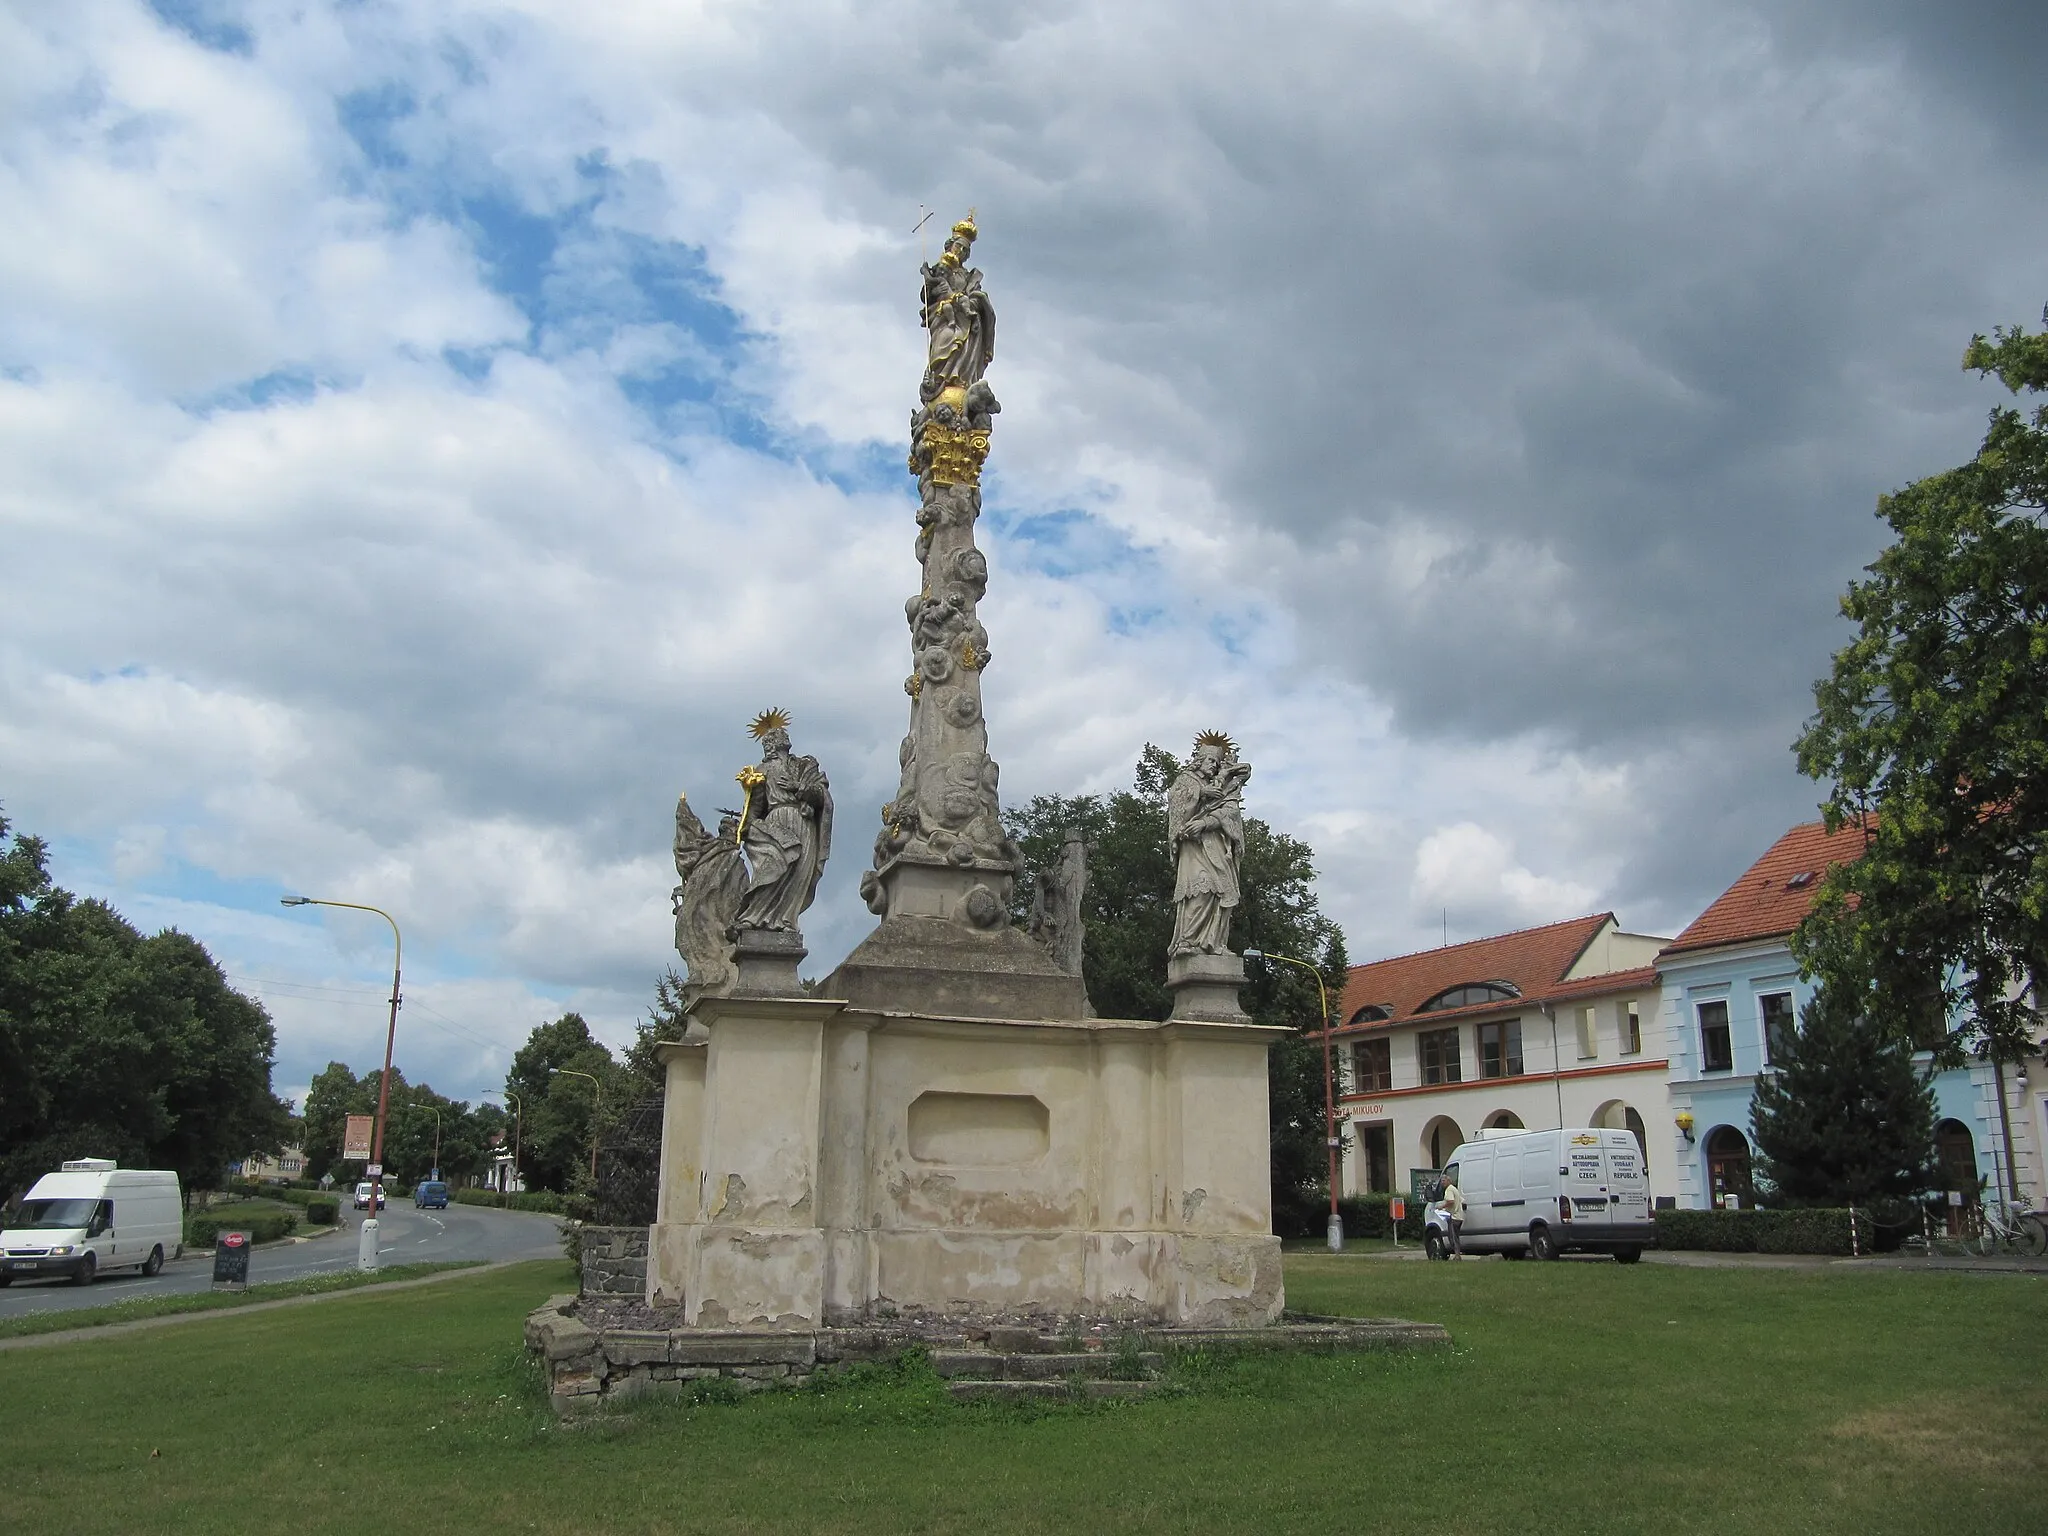 Photo showing: Drnholec in Břeclav District, Czech Republic. Náměstí svobody square with the column with a statue of the Virgin Mary.